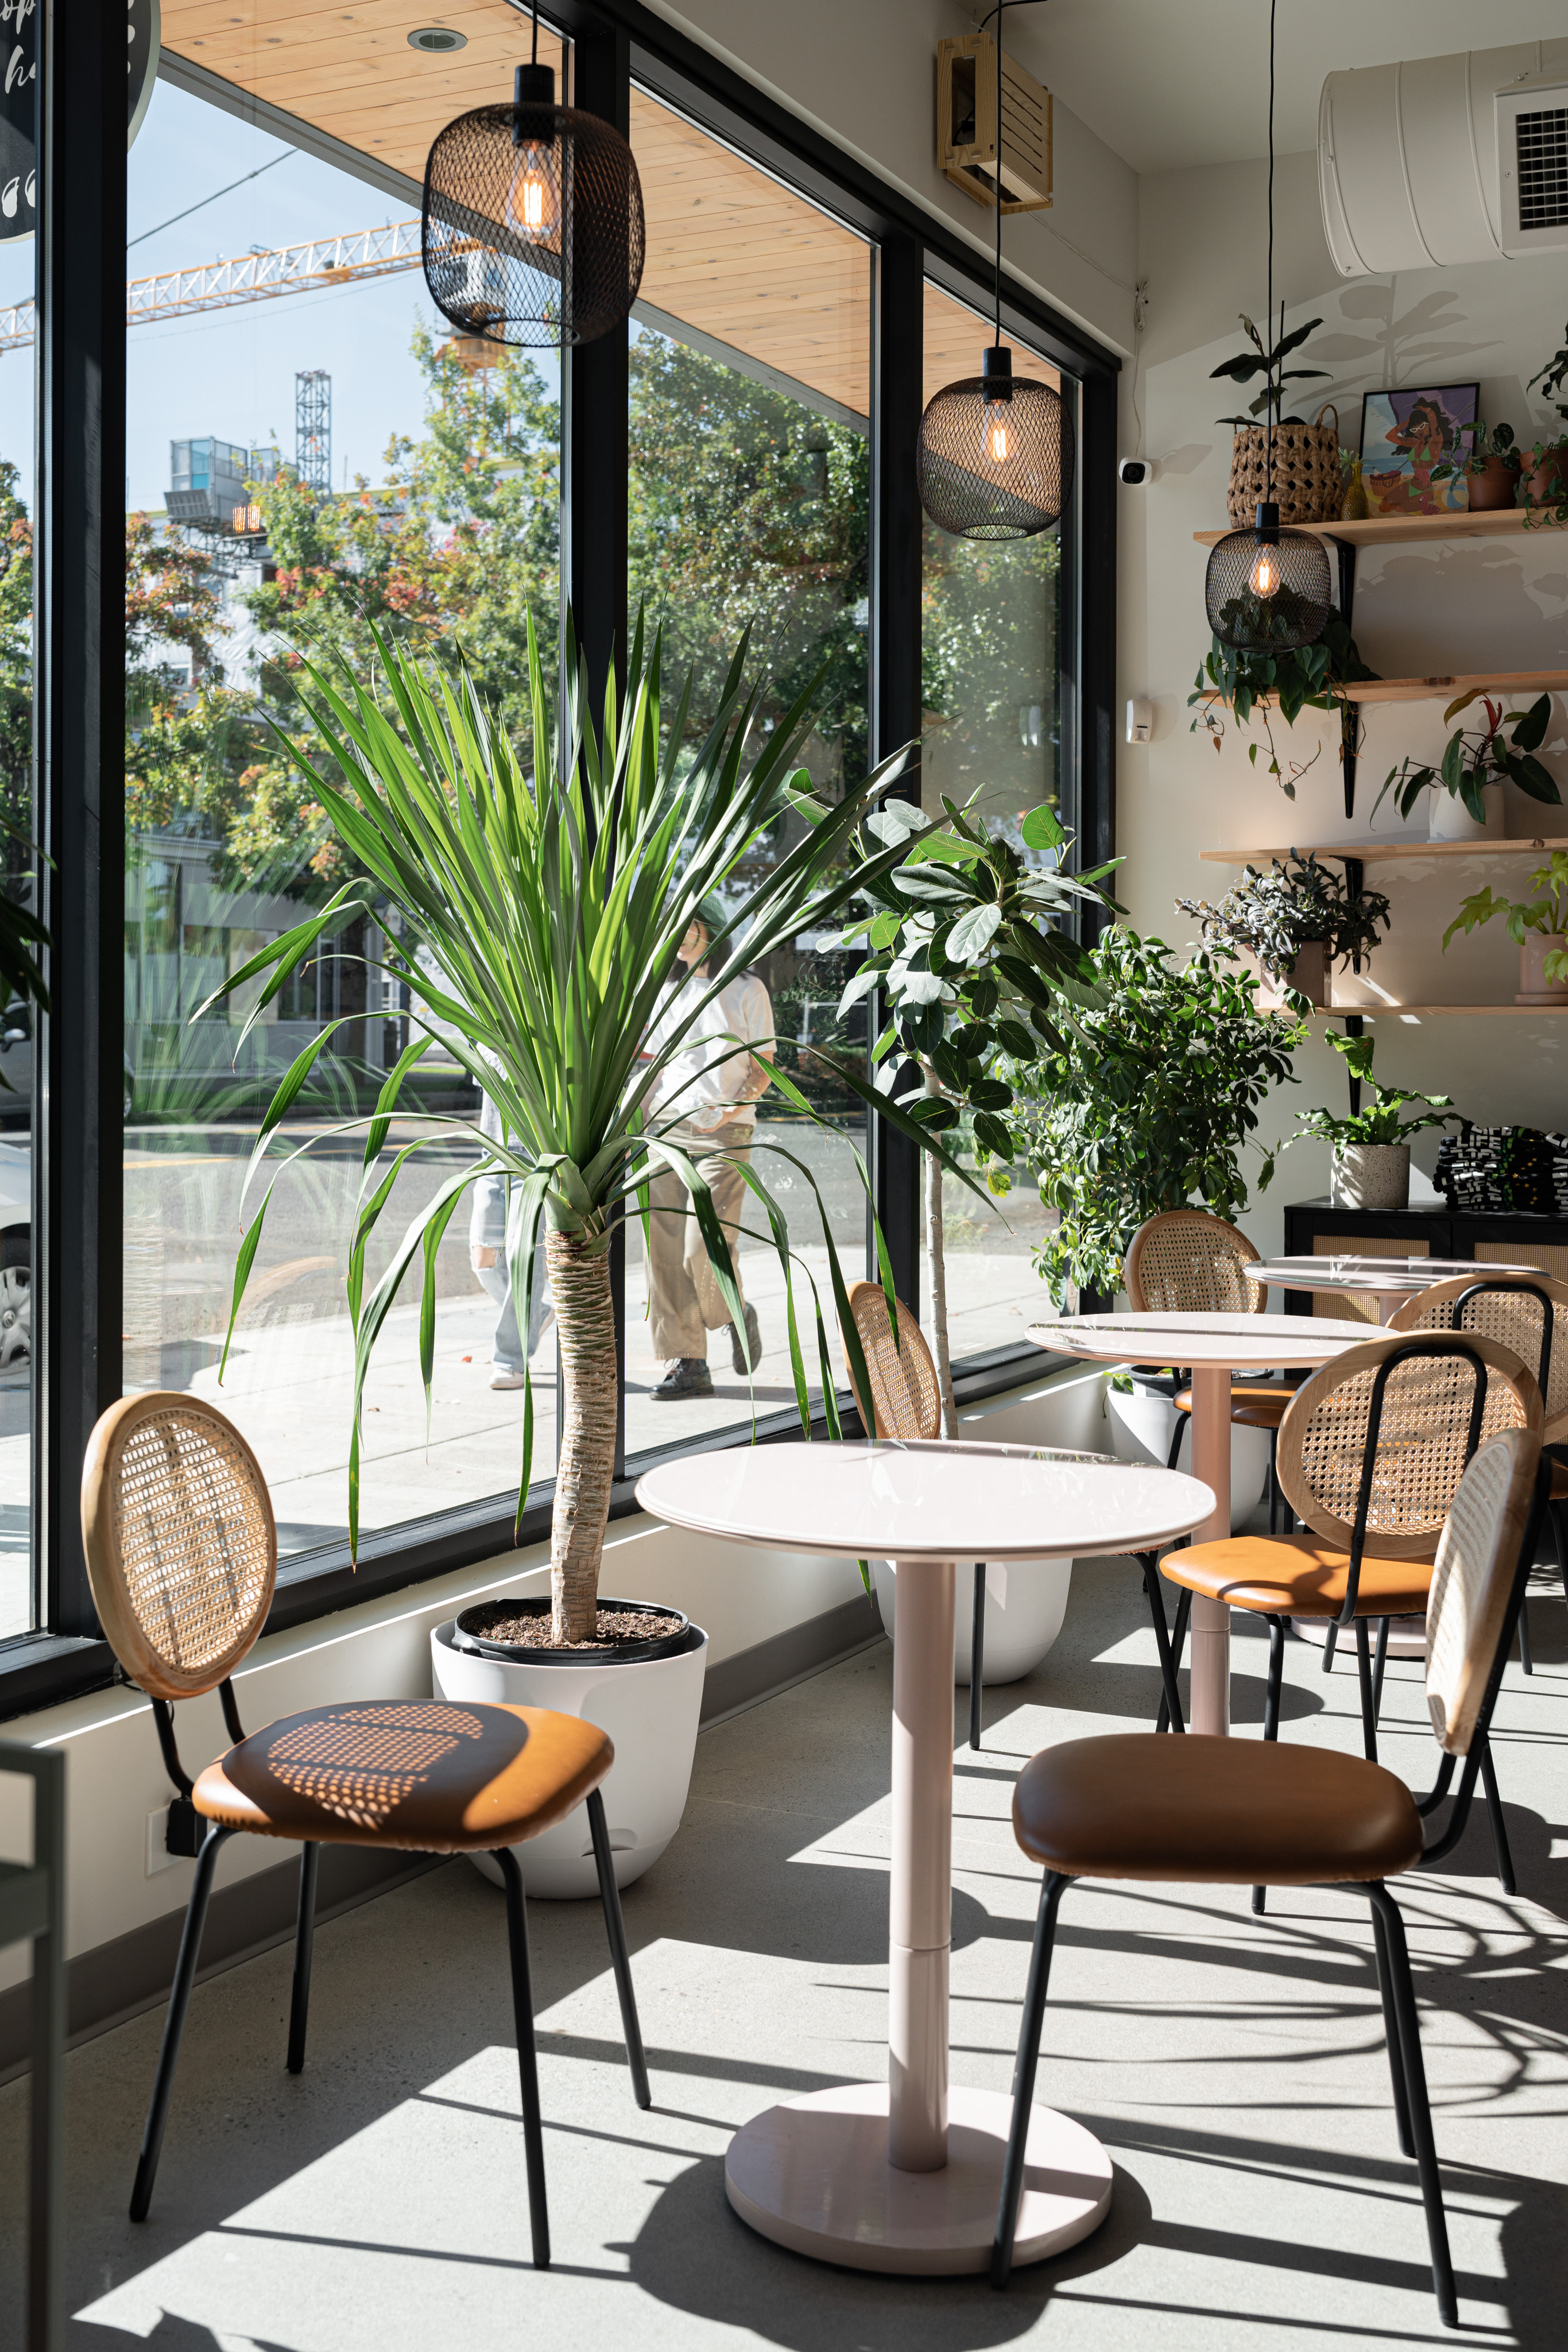 Tables next to windows in a plant-filled bakery.